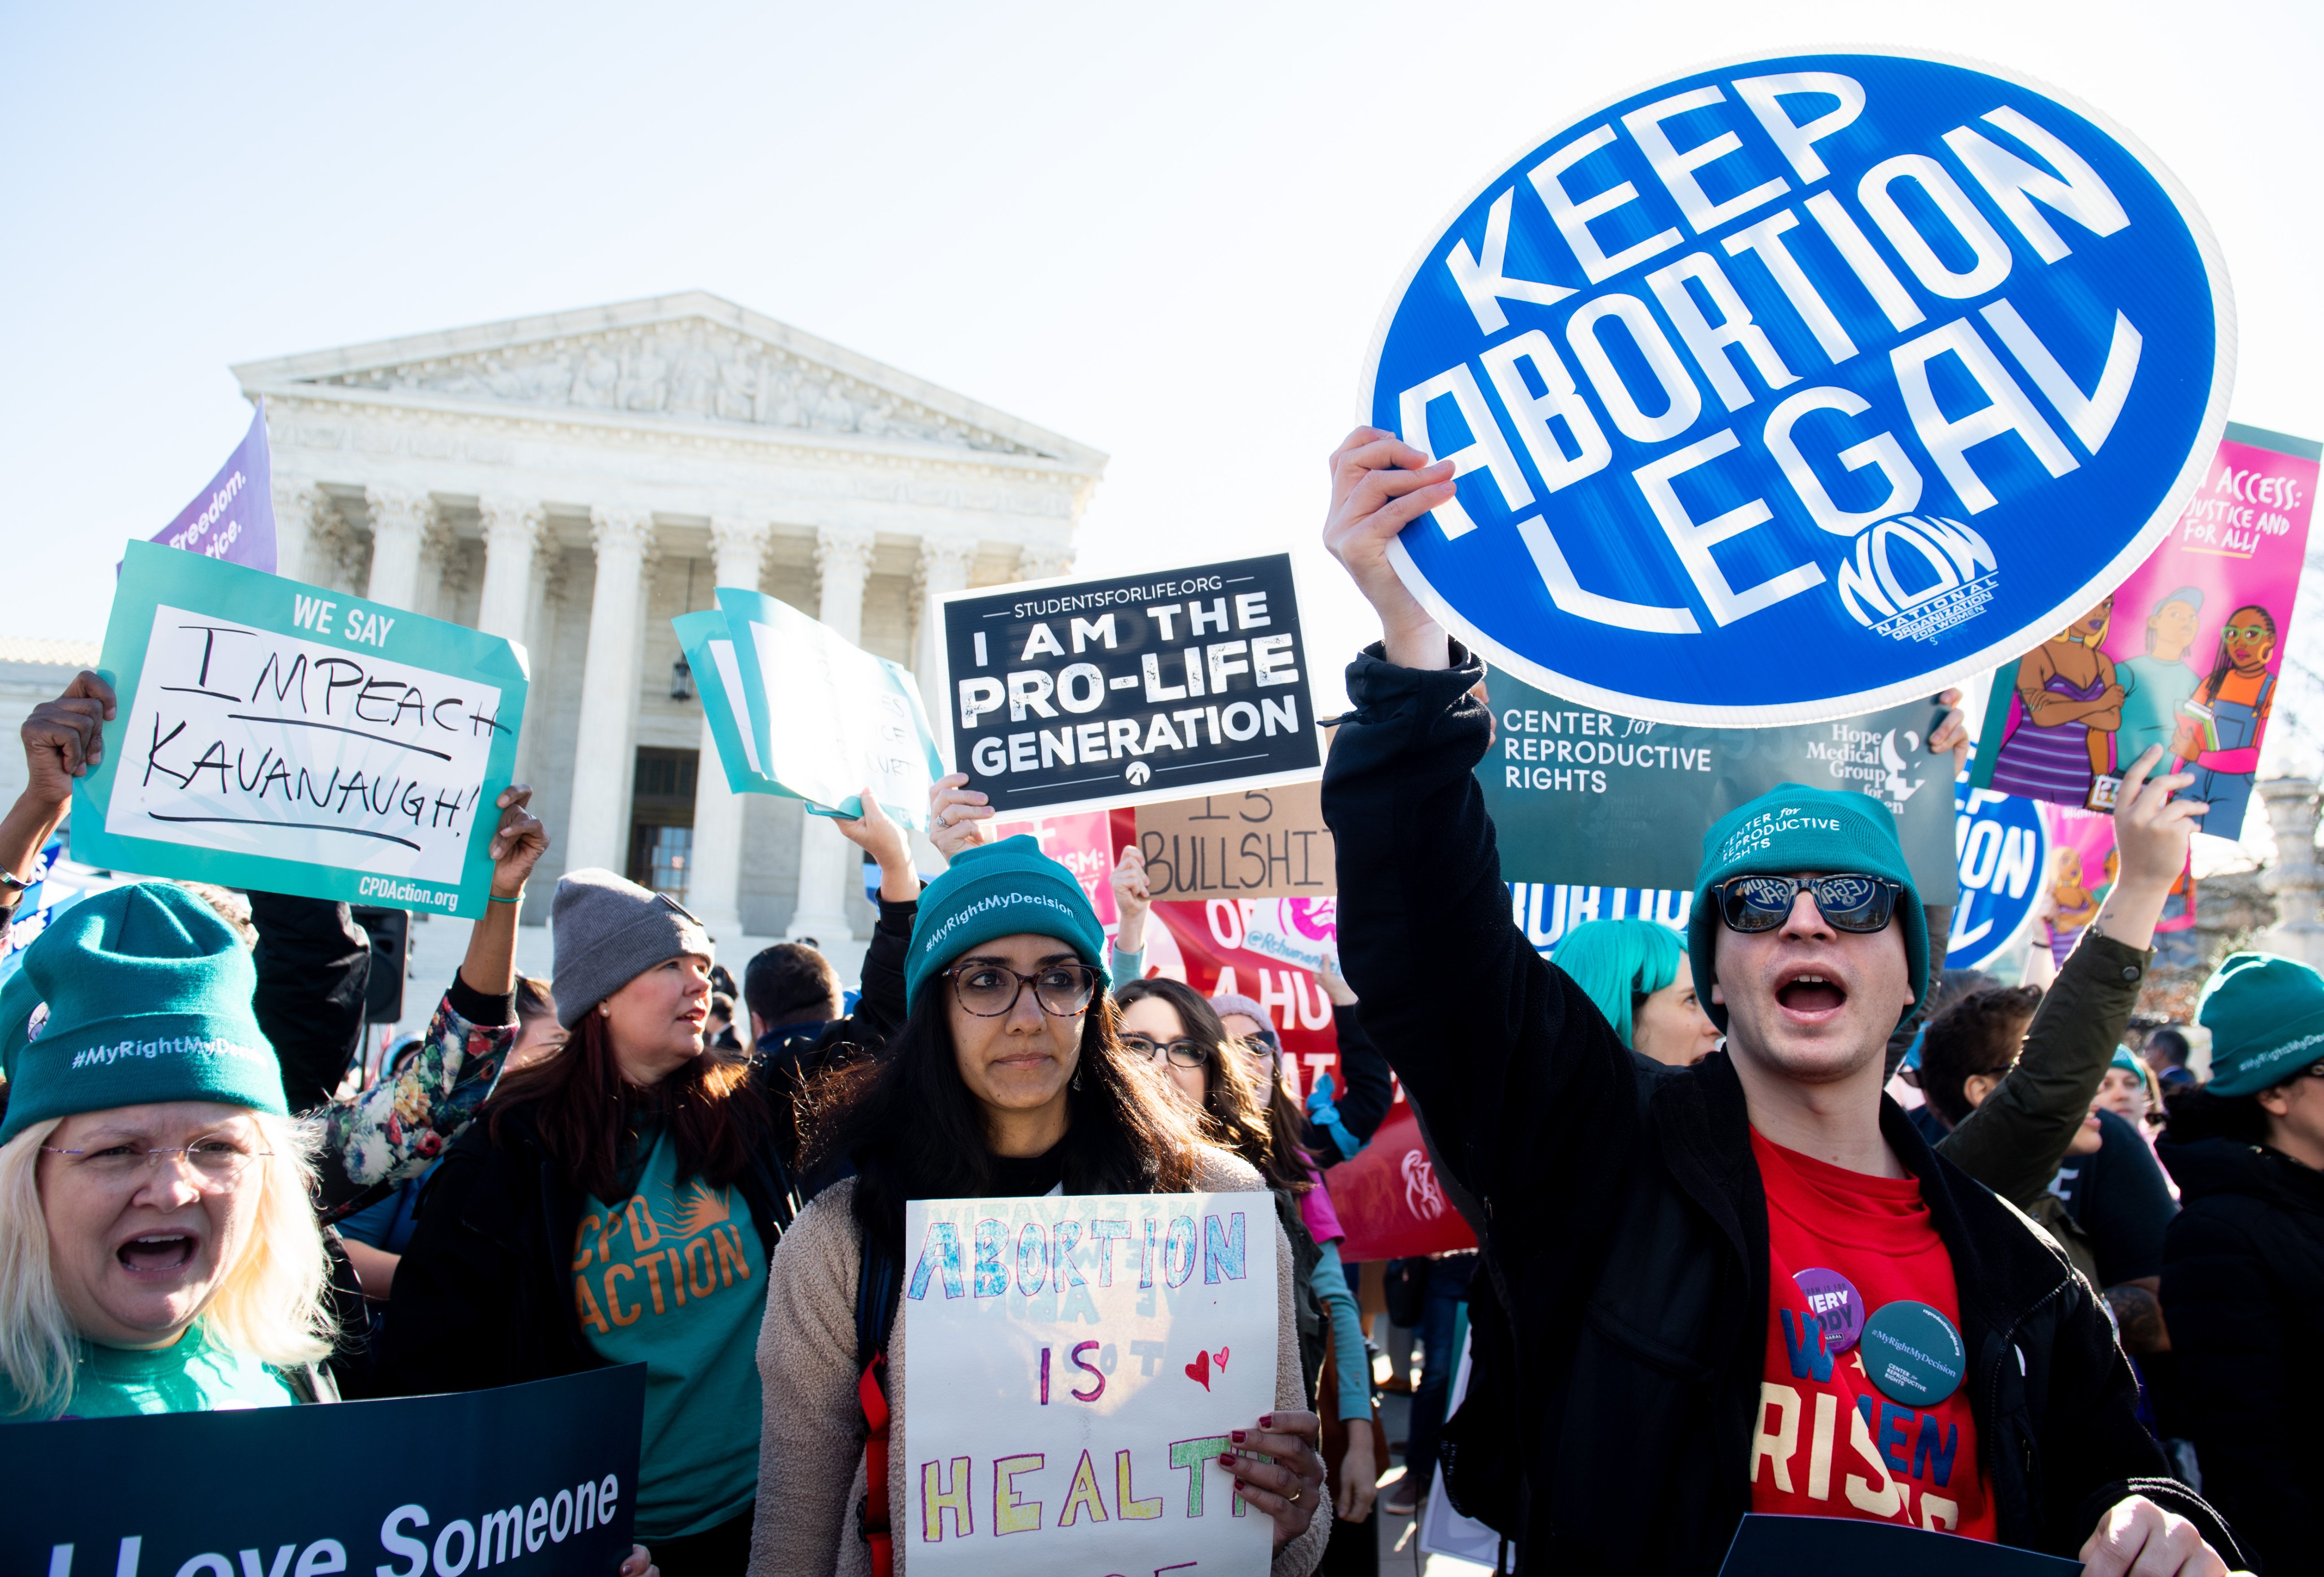 Abortion rights activists and those opposing abortion protest during a demonstration outside the U.S. Supreme Court in Washington, D.C., March 4, 2020, during oral arguments regarding a Louisiana law about abortion access. (Saul Loeb—AFP/Getty Images)